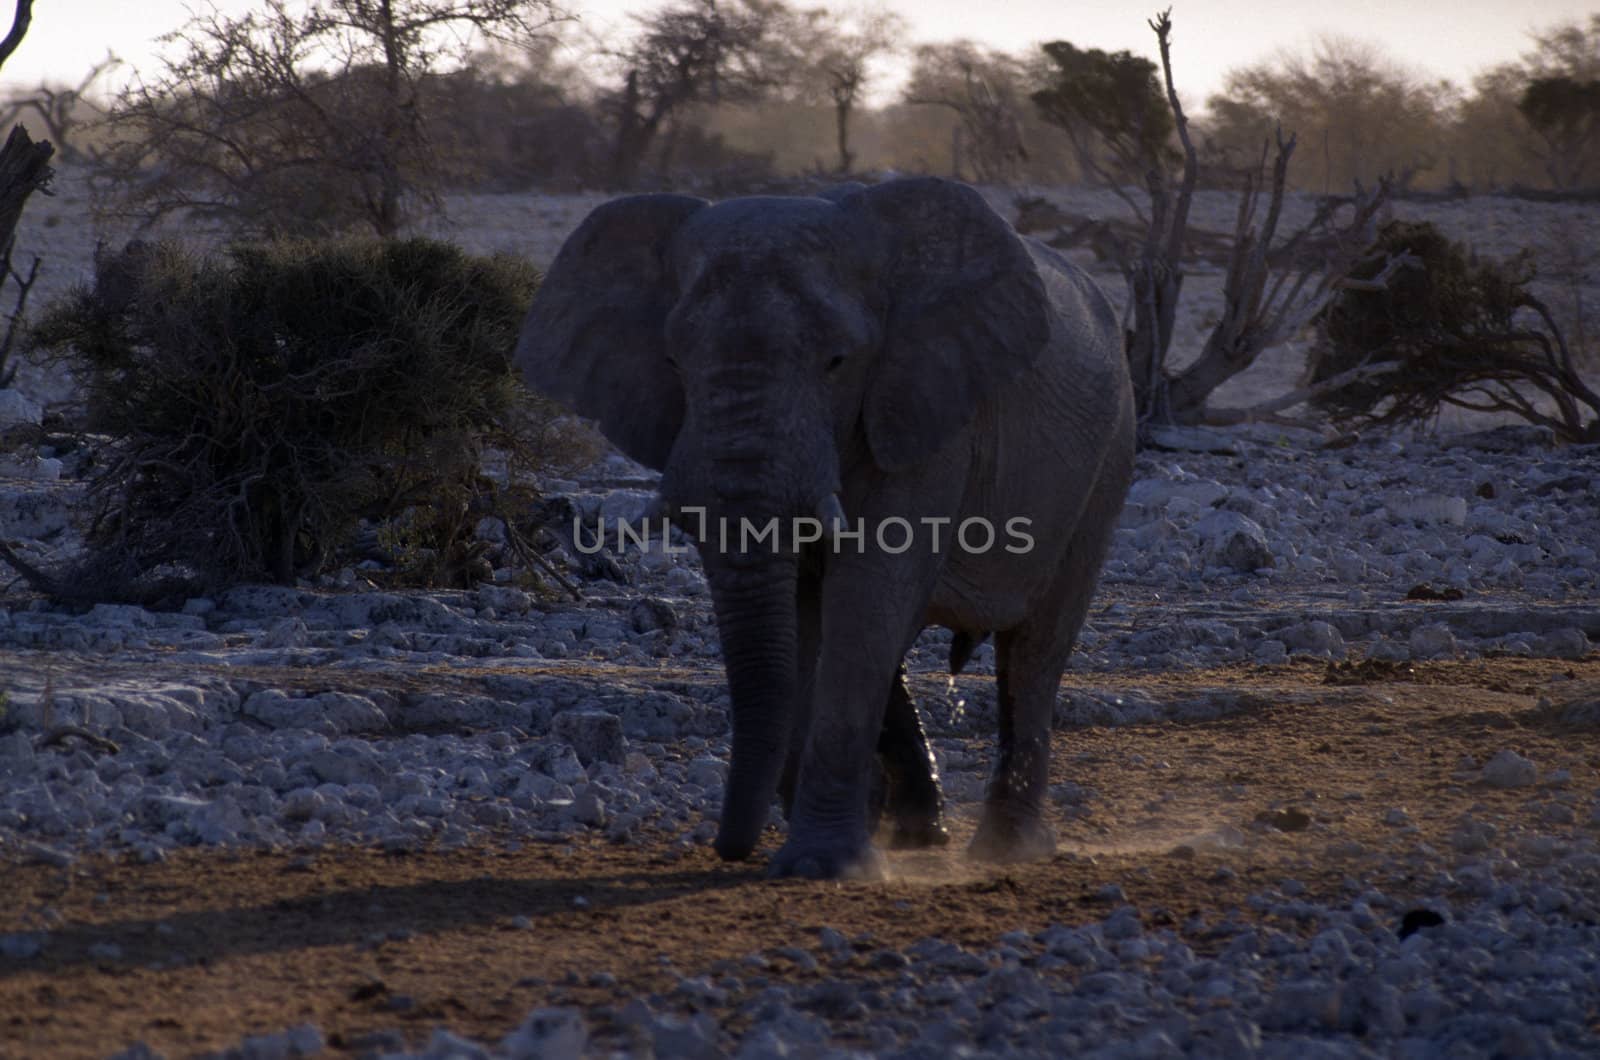 Adult elephant on the plain moving through the grass.